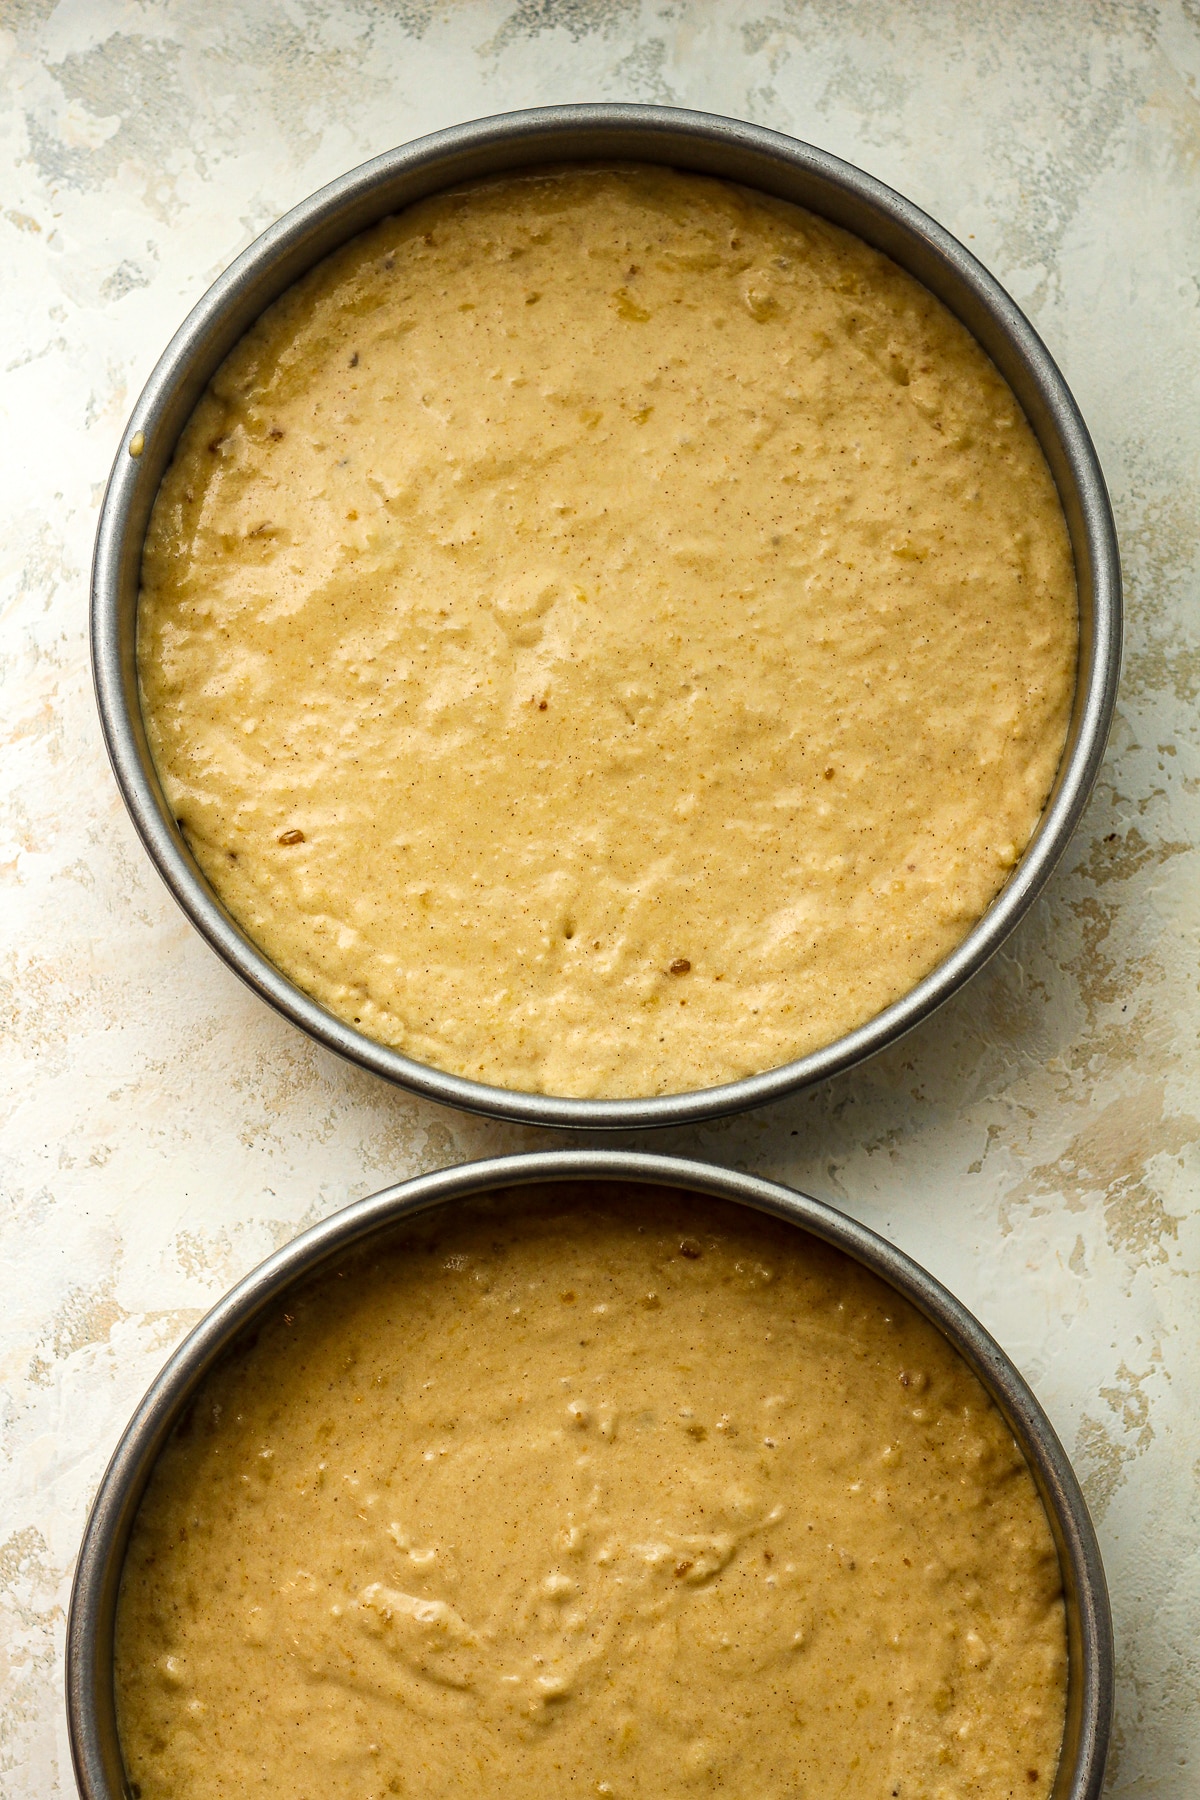 Two round pans of the cake batter.